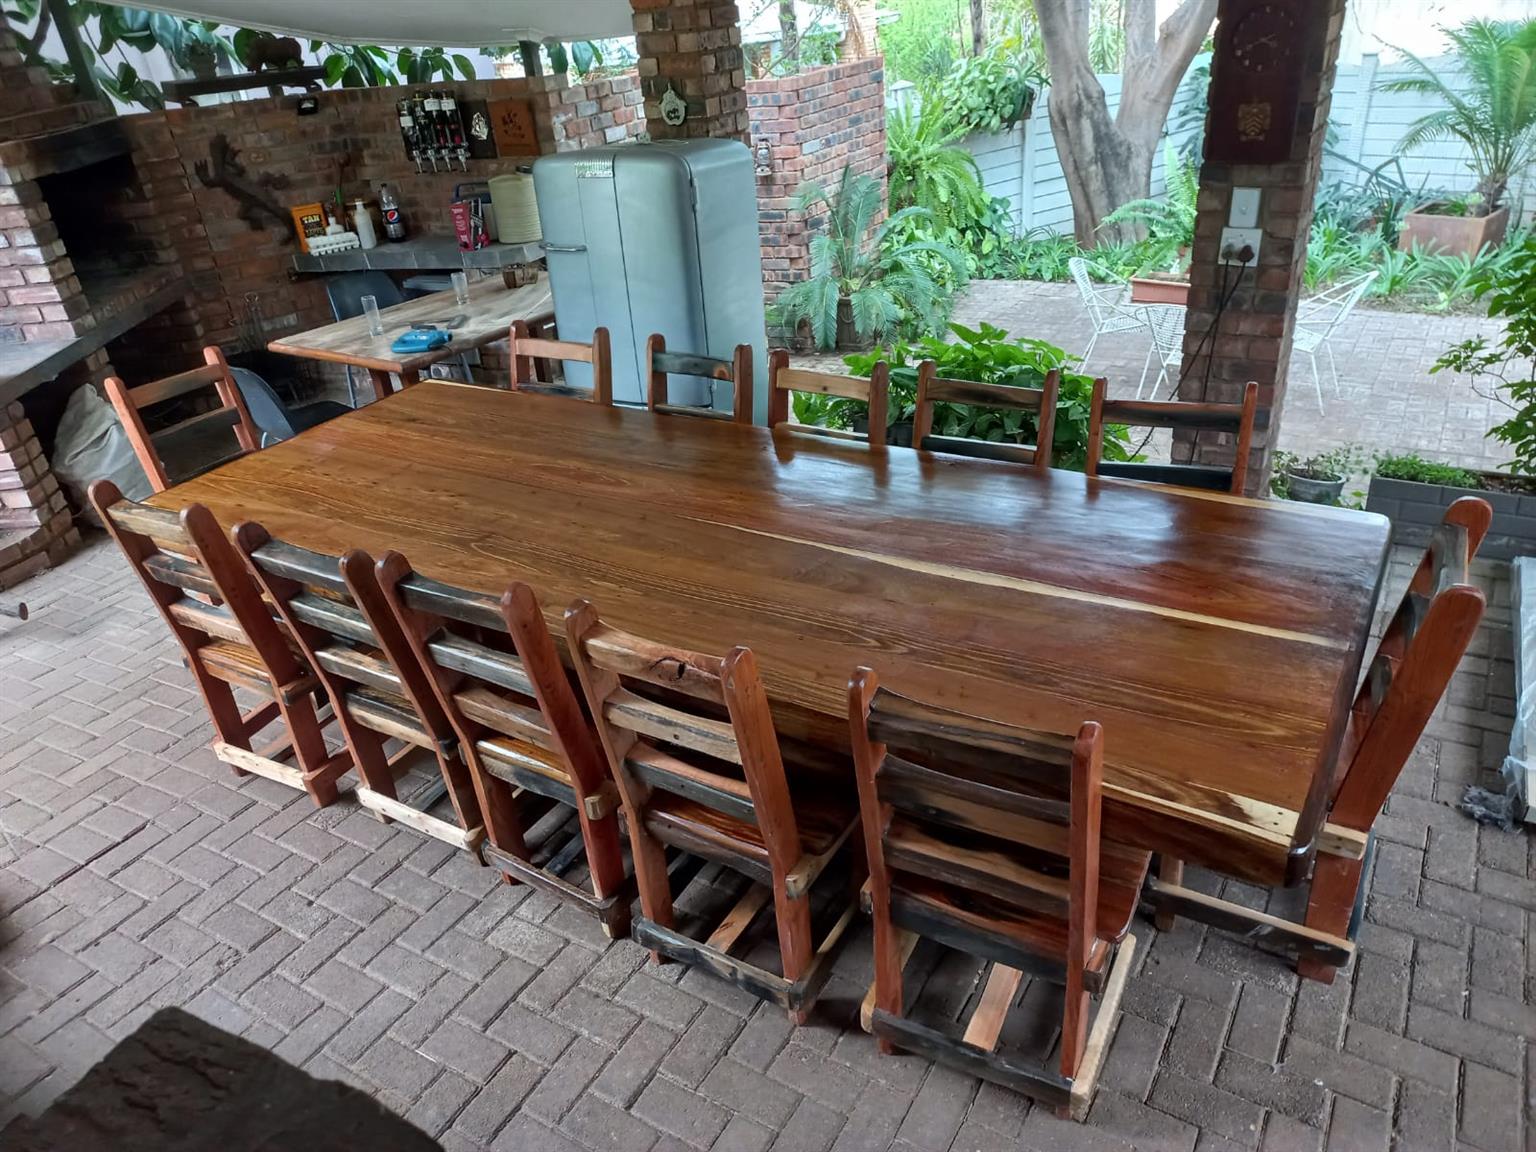 12 seater Patio table & chair